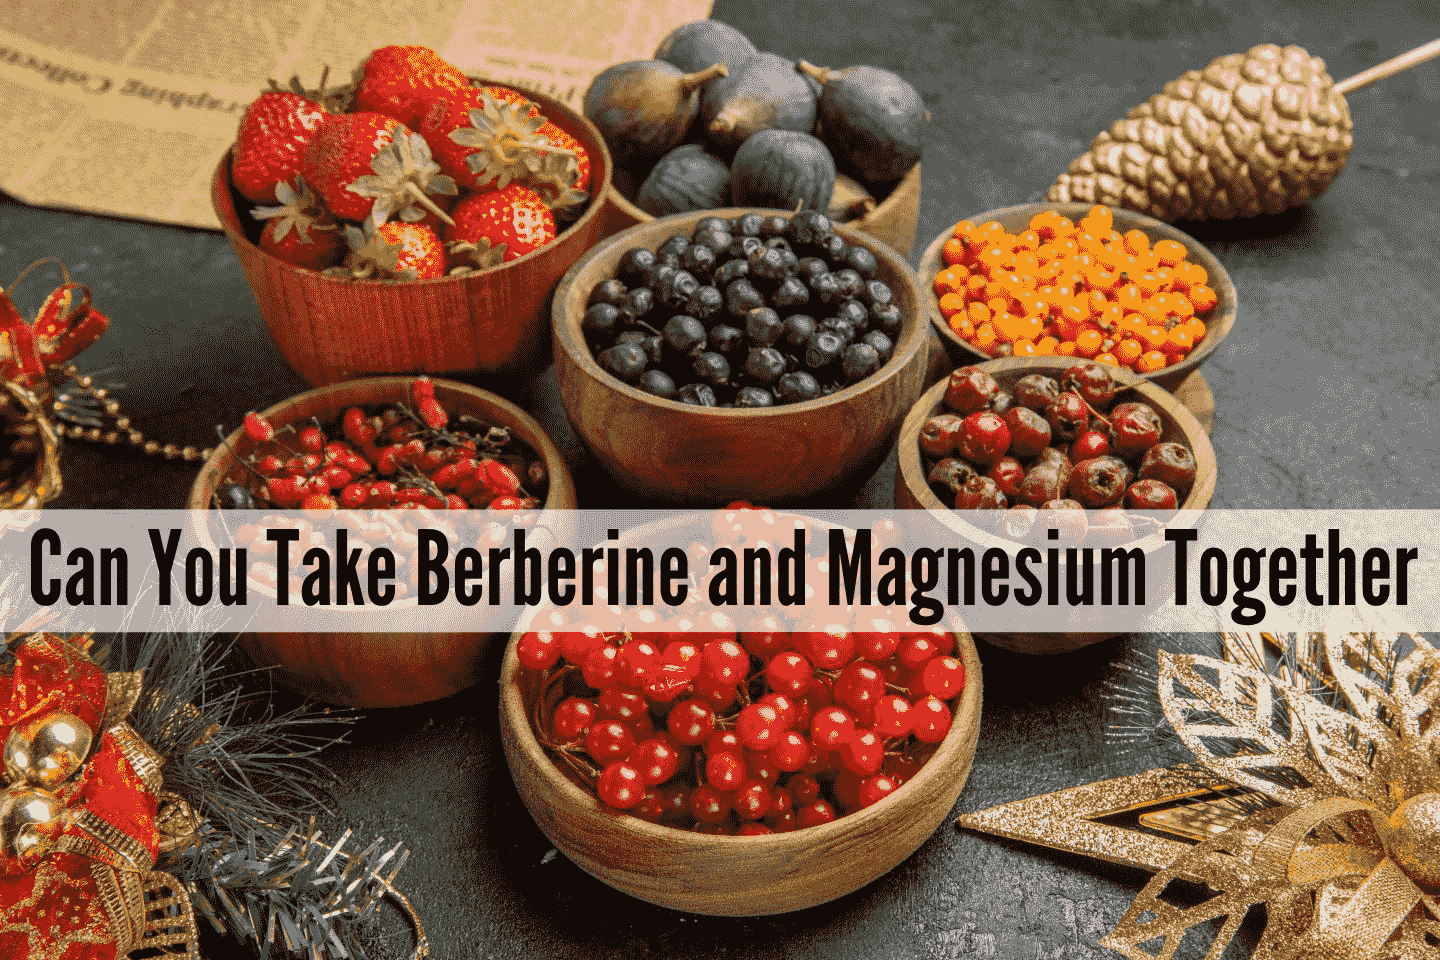 Can You Take Berberine and Magnesium Together